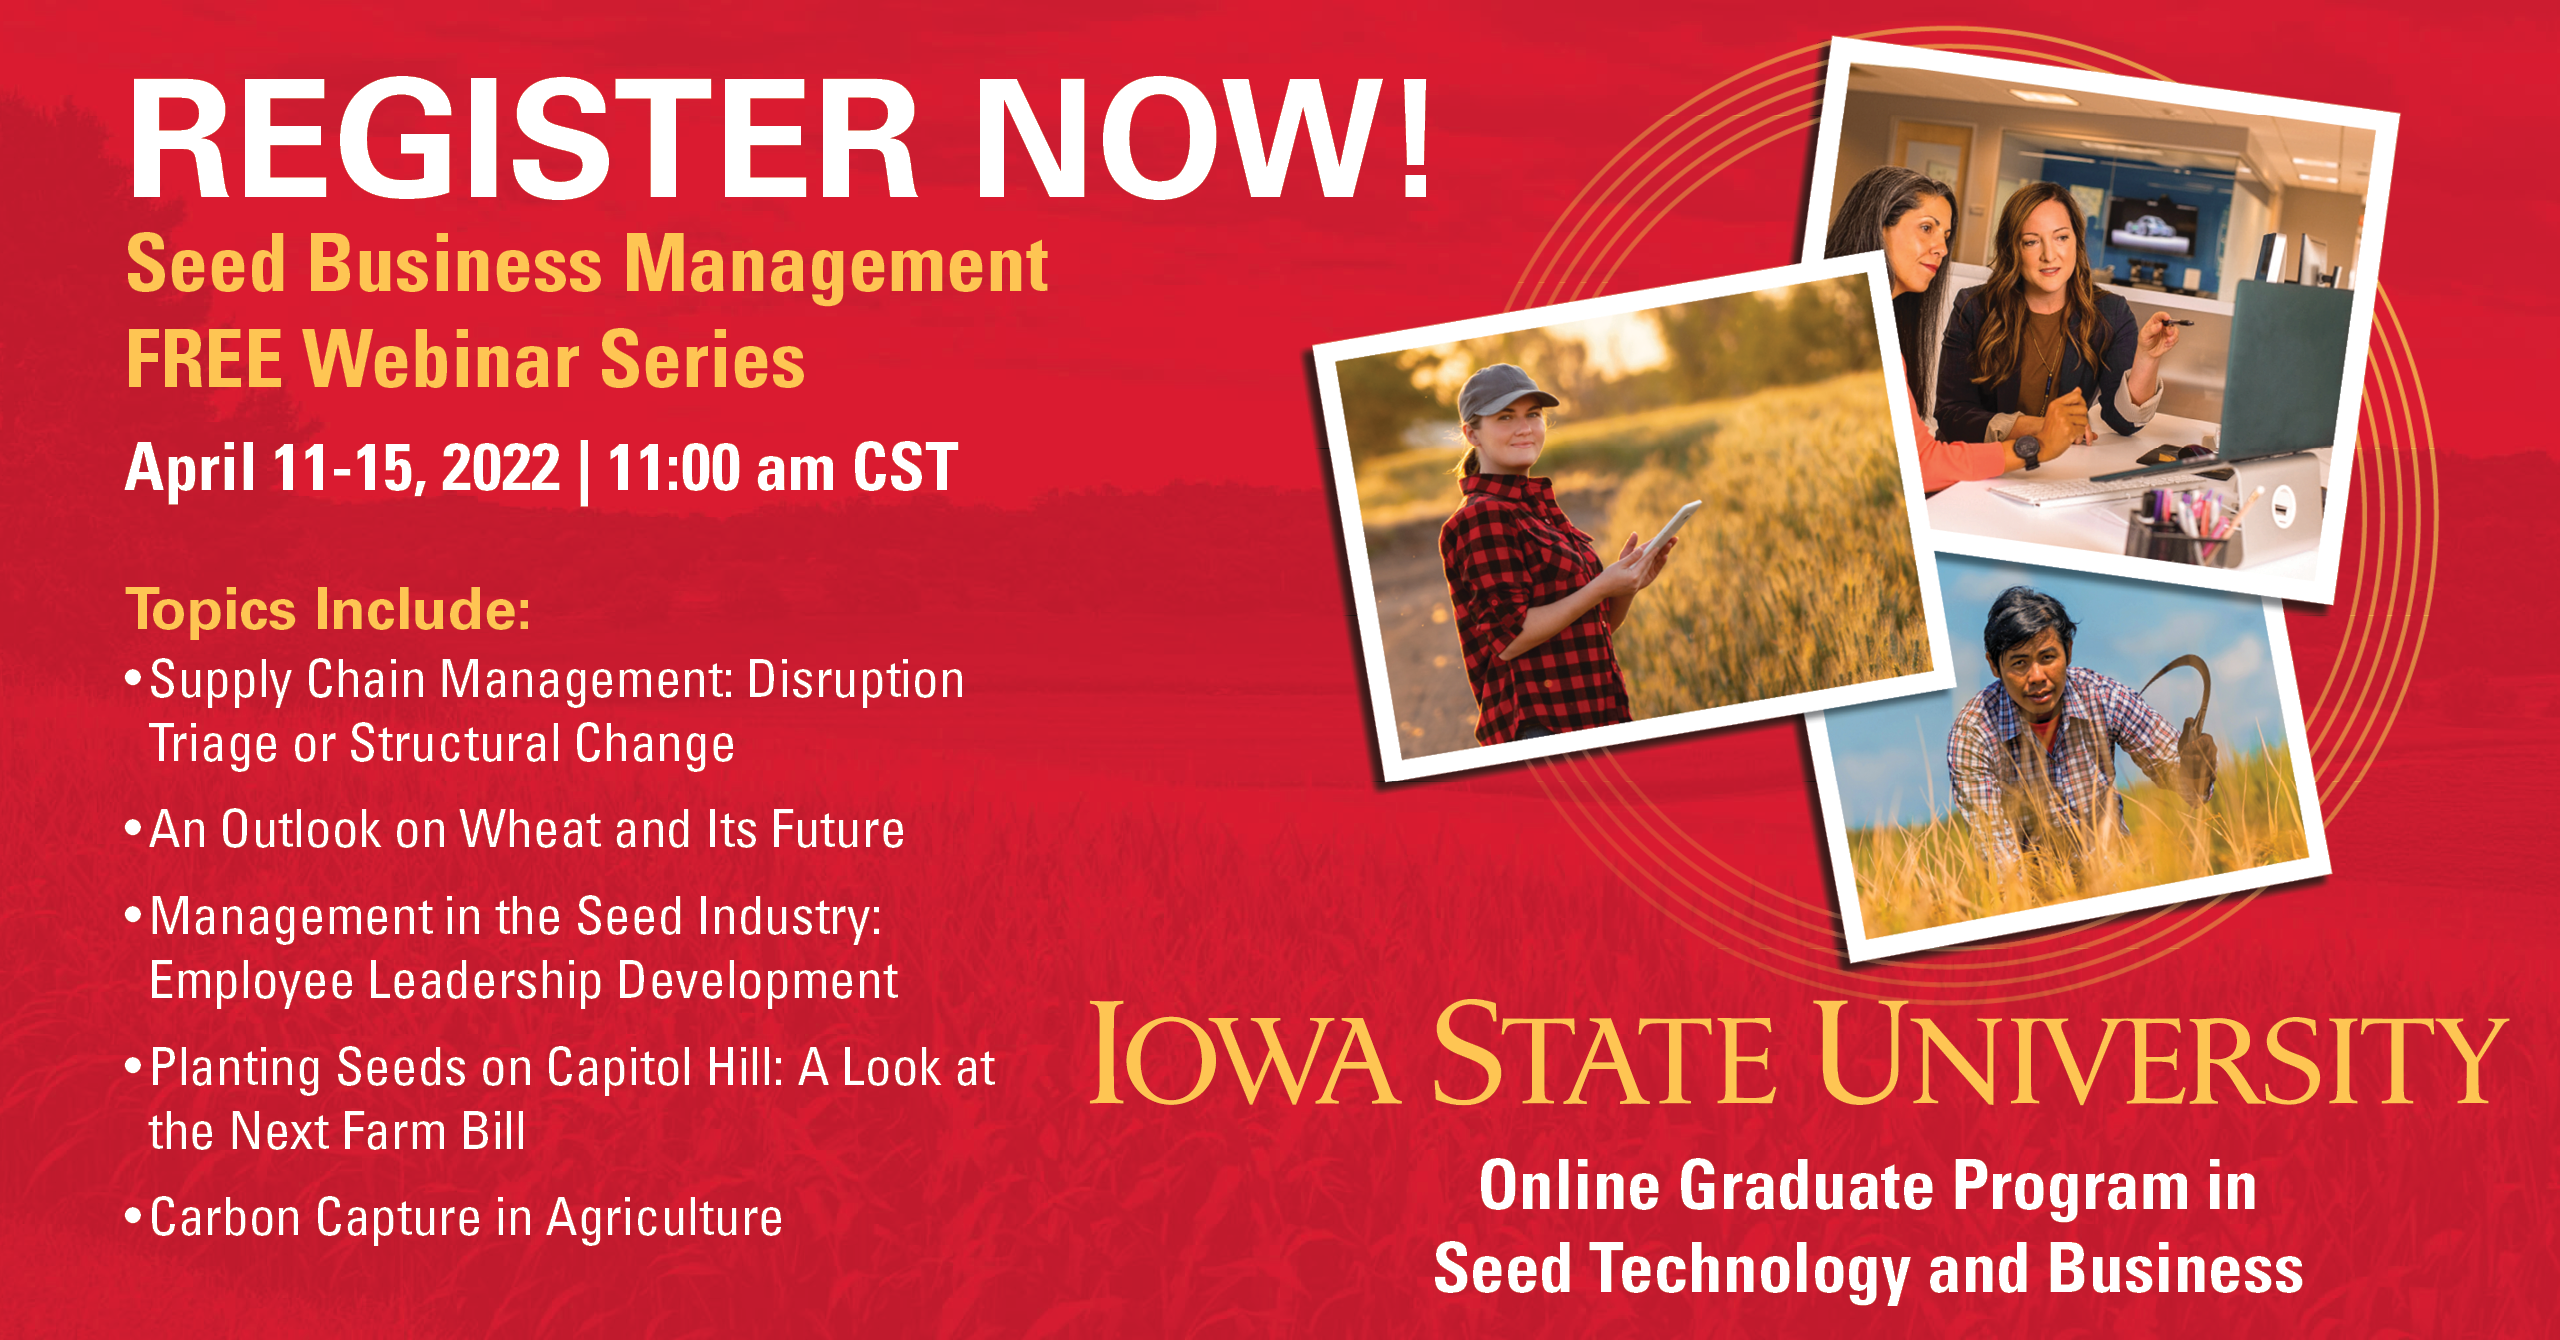 Graduate Program in Seed Technology and Business at Iowa State University Offers Free Week of Webinars